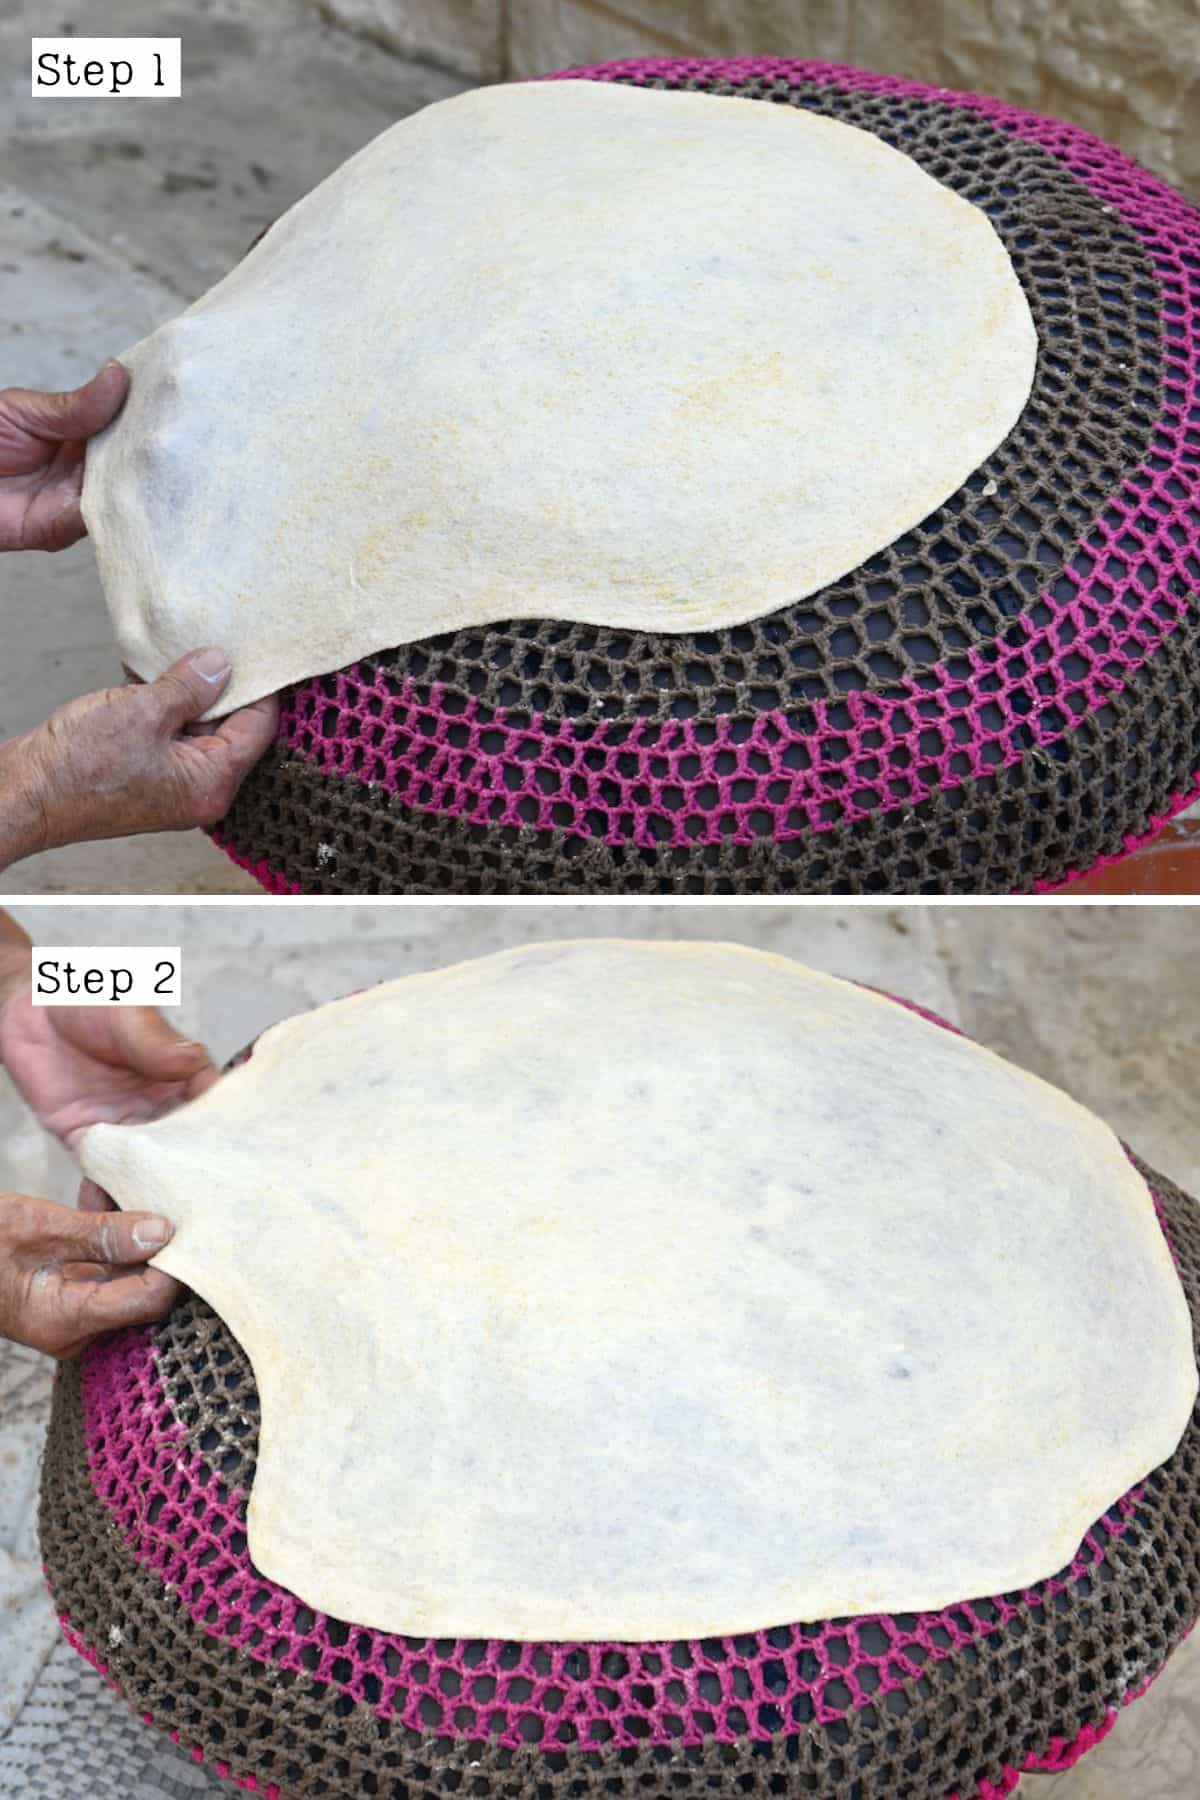 Steps for stretching markouk bread dough